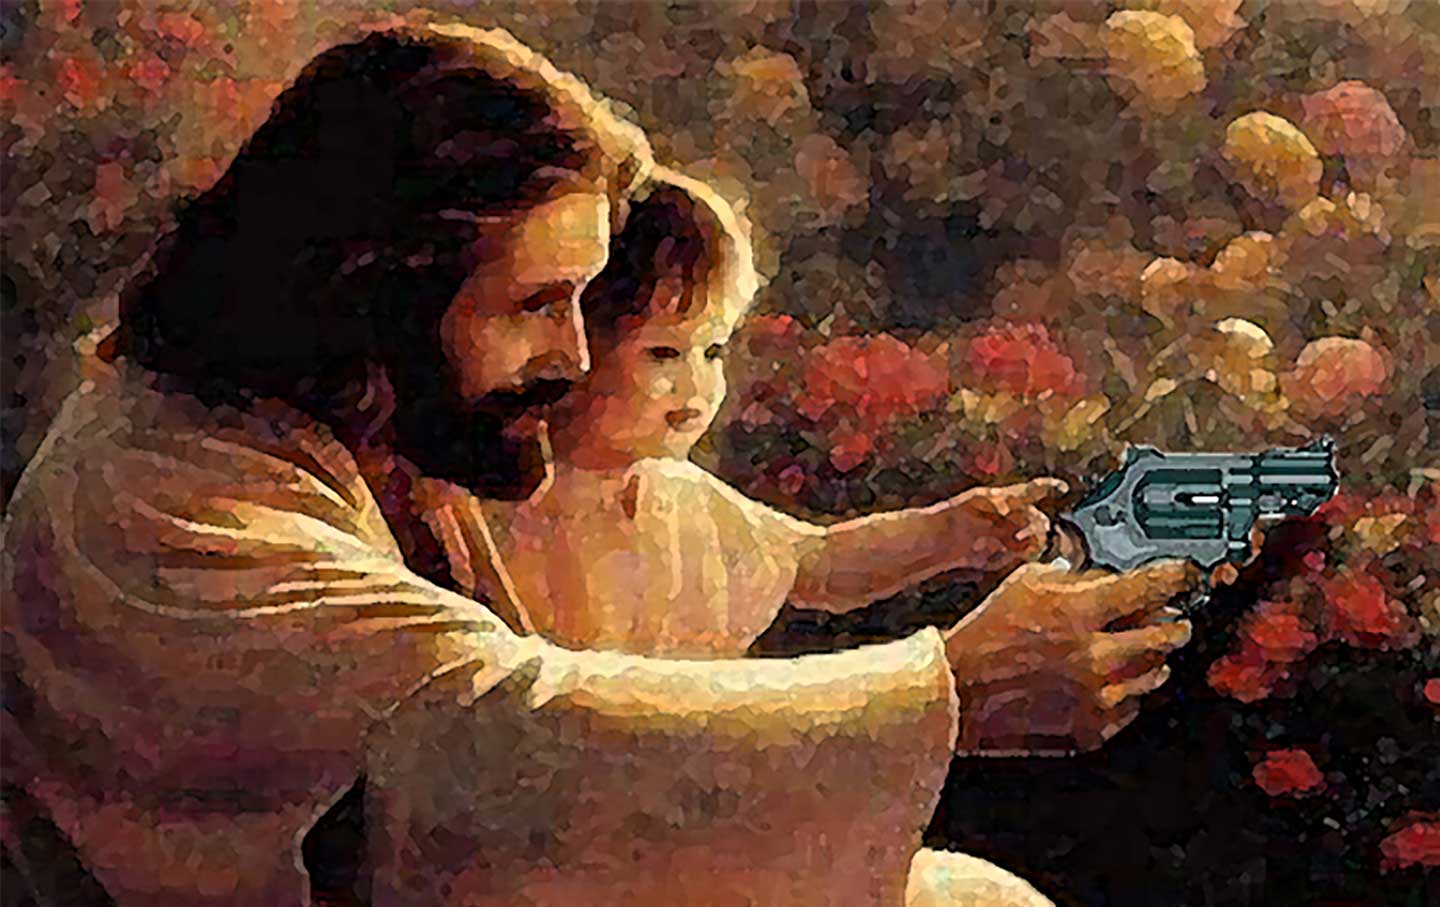 Whom Would Jesus Shoot?